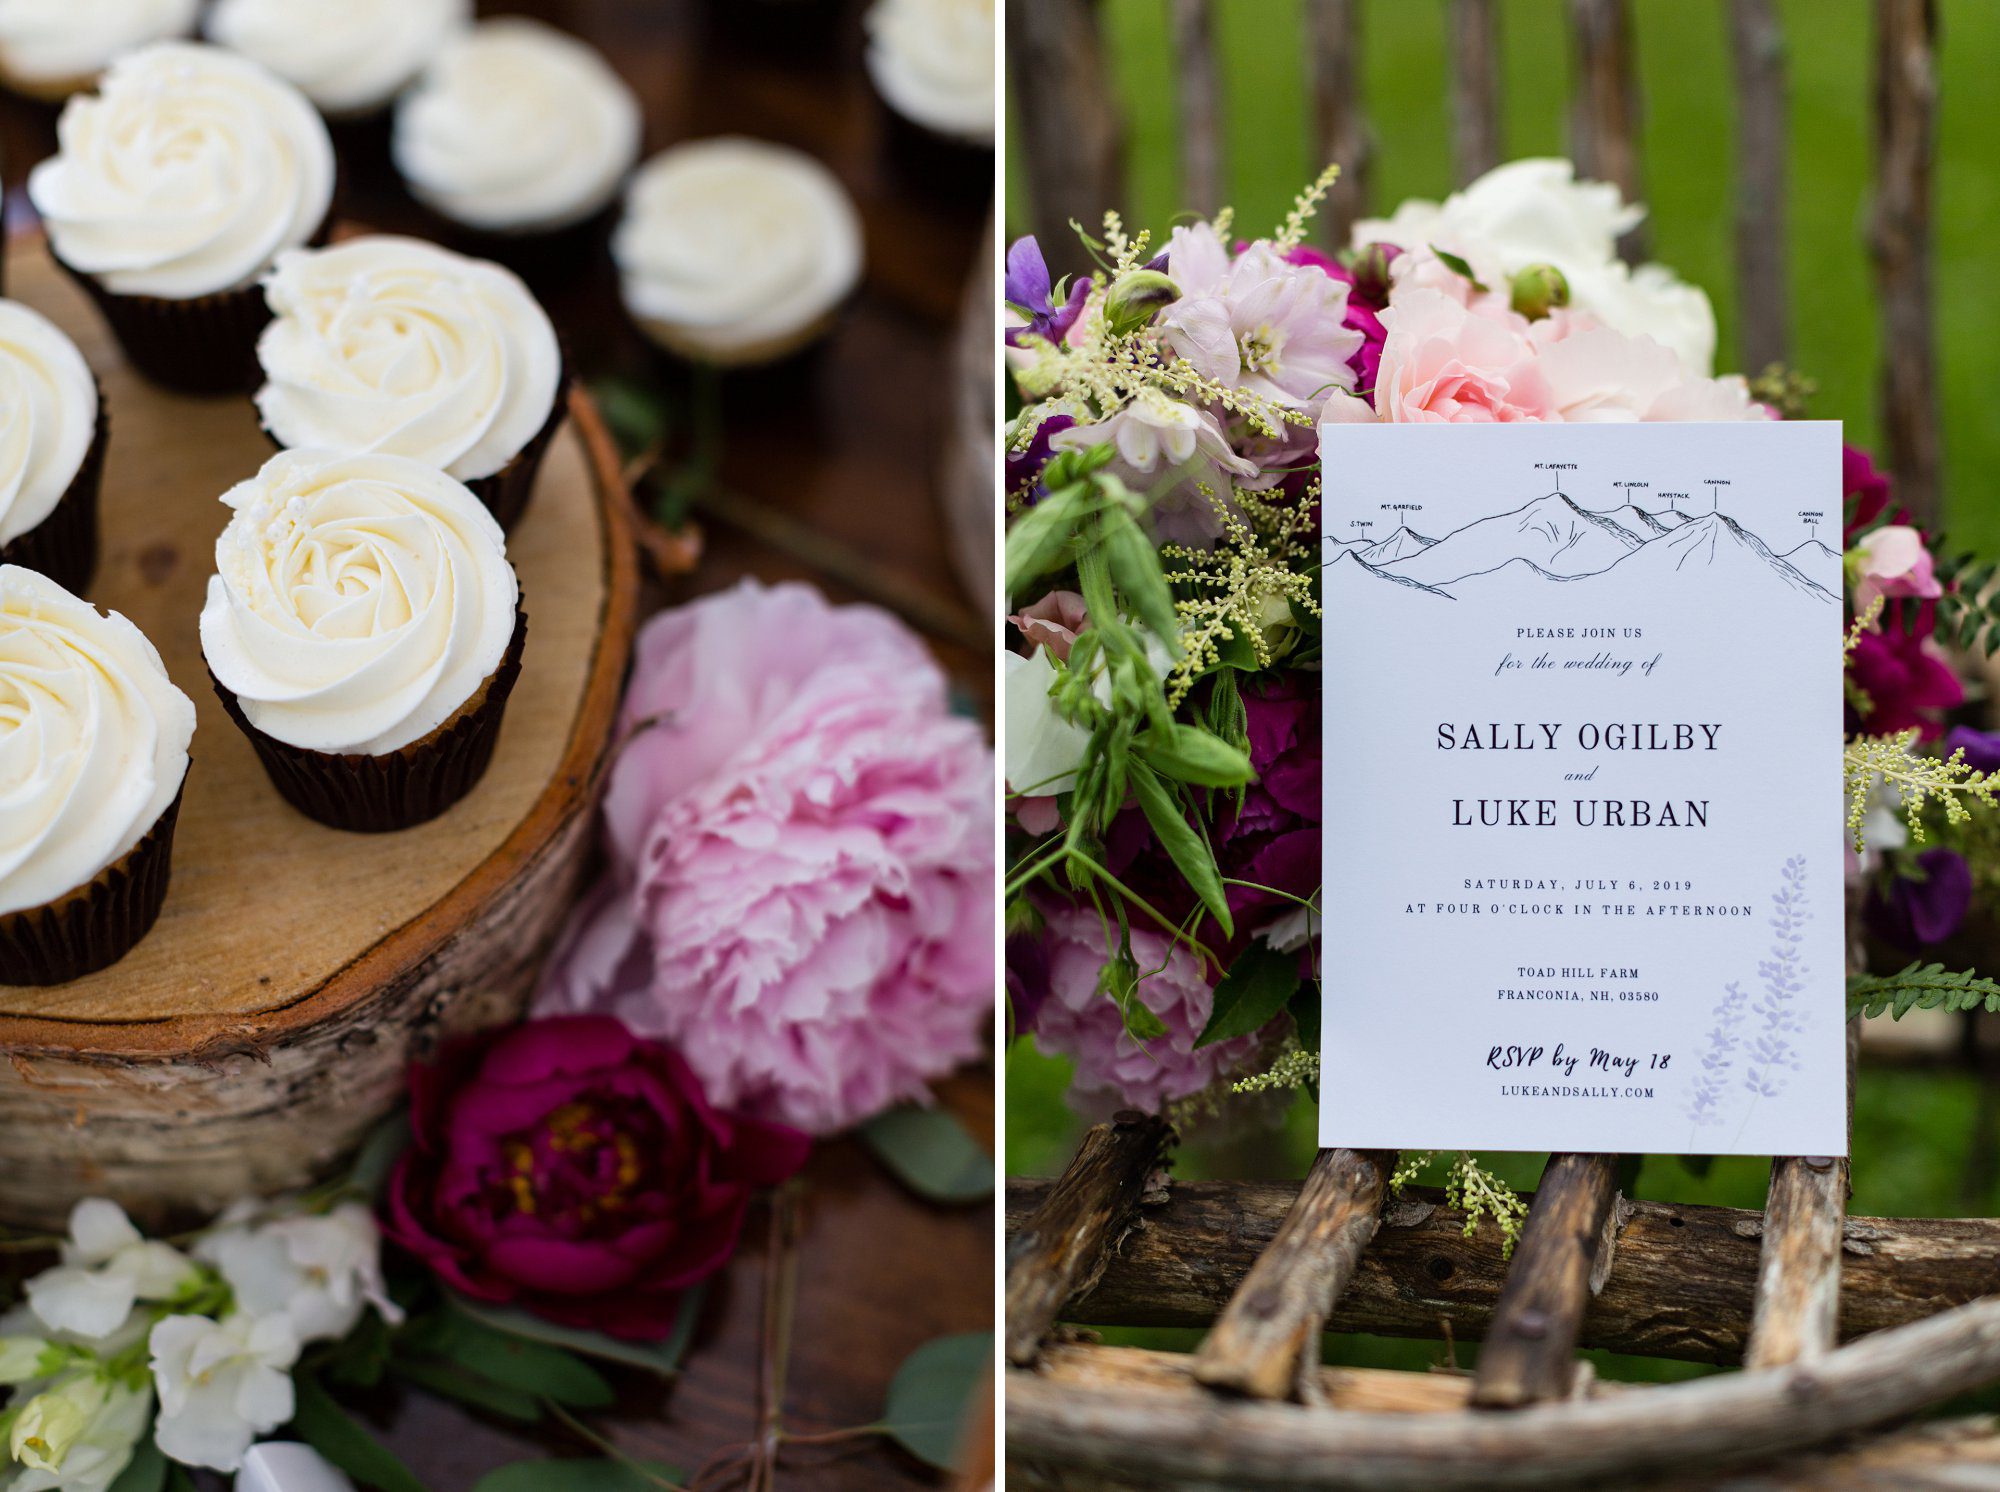 Beautiful July Wedding at The Toad Hill Farm in Franconia, NH | Cupcakes by Henny B and flowers by Tarrnation Flowers